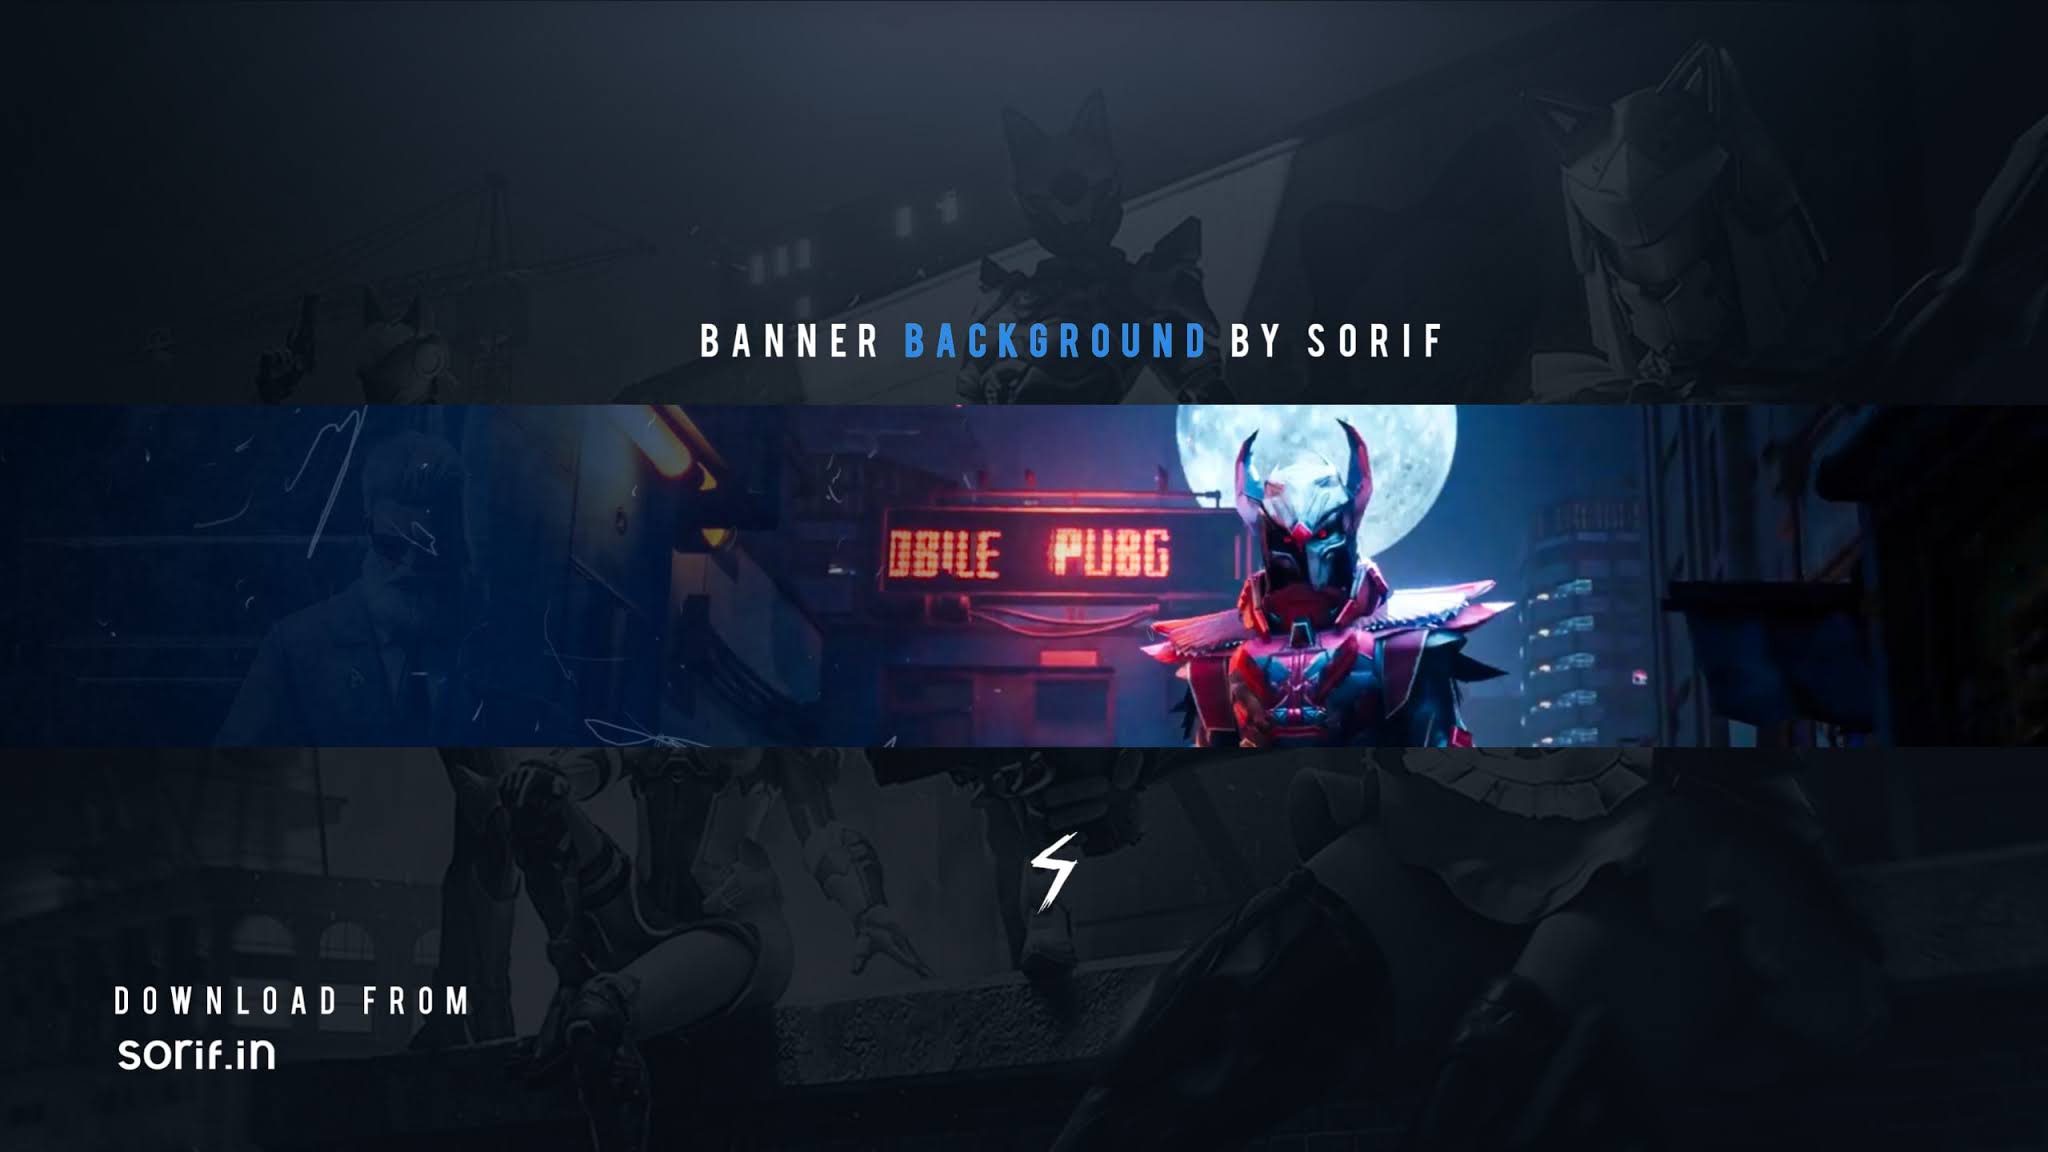 COD PUBG 💥 Gaming Banner Template: Download FREE GFX for